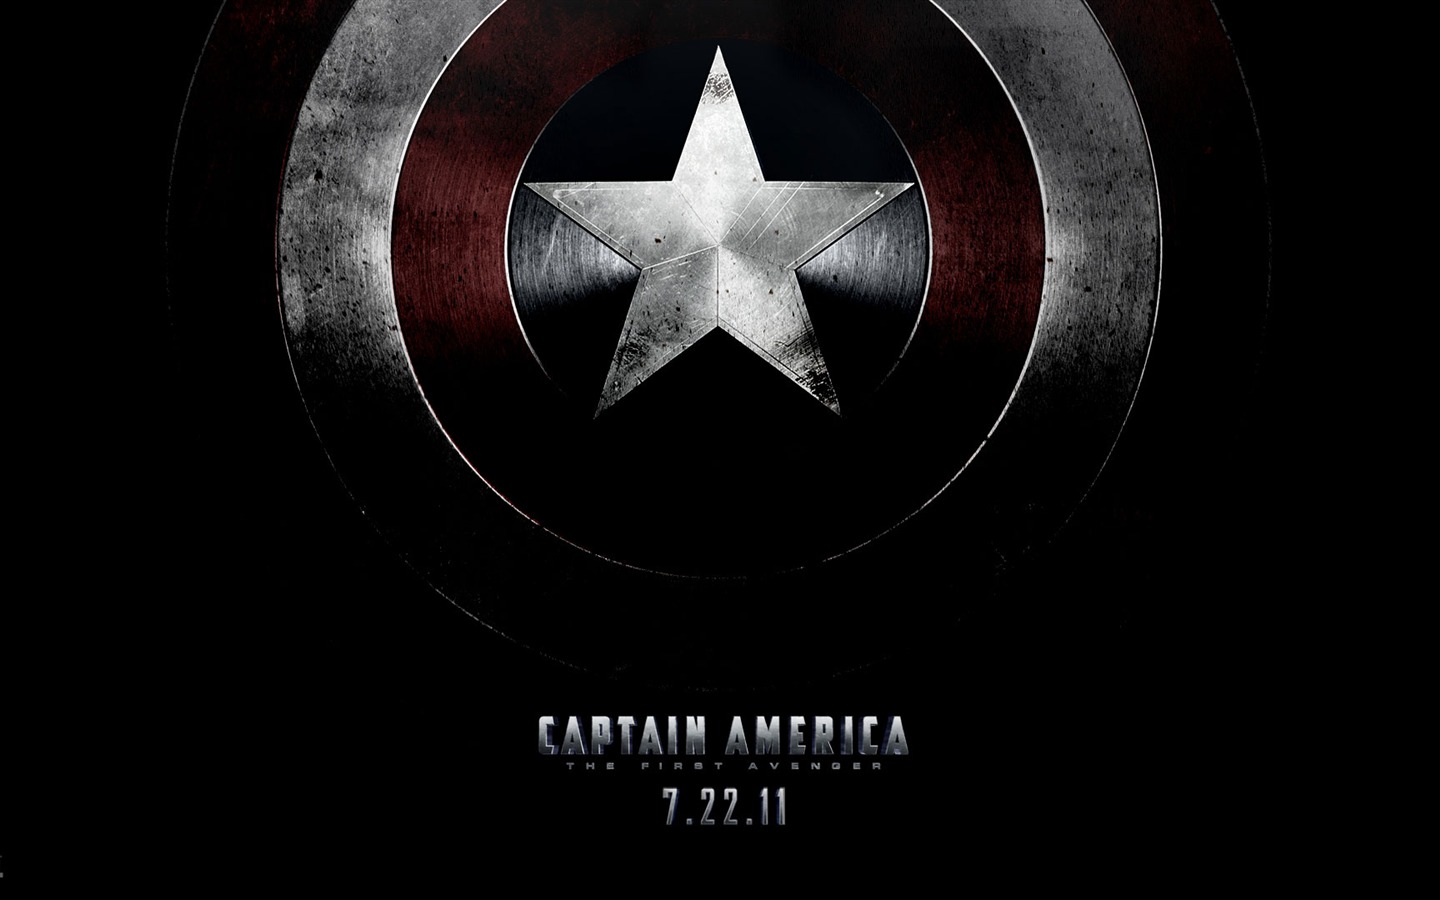 Captain America: The First Avenger wallpapers HD #10 - 1440x900